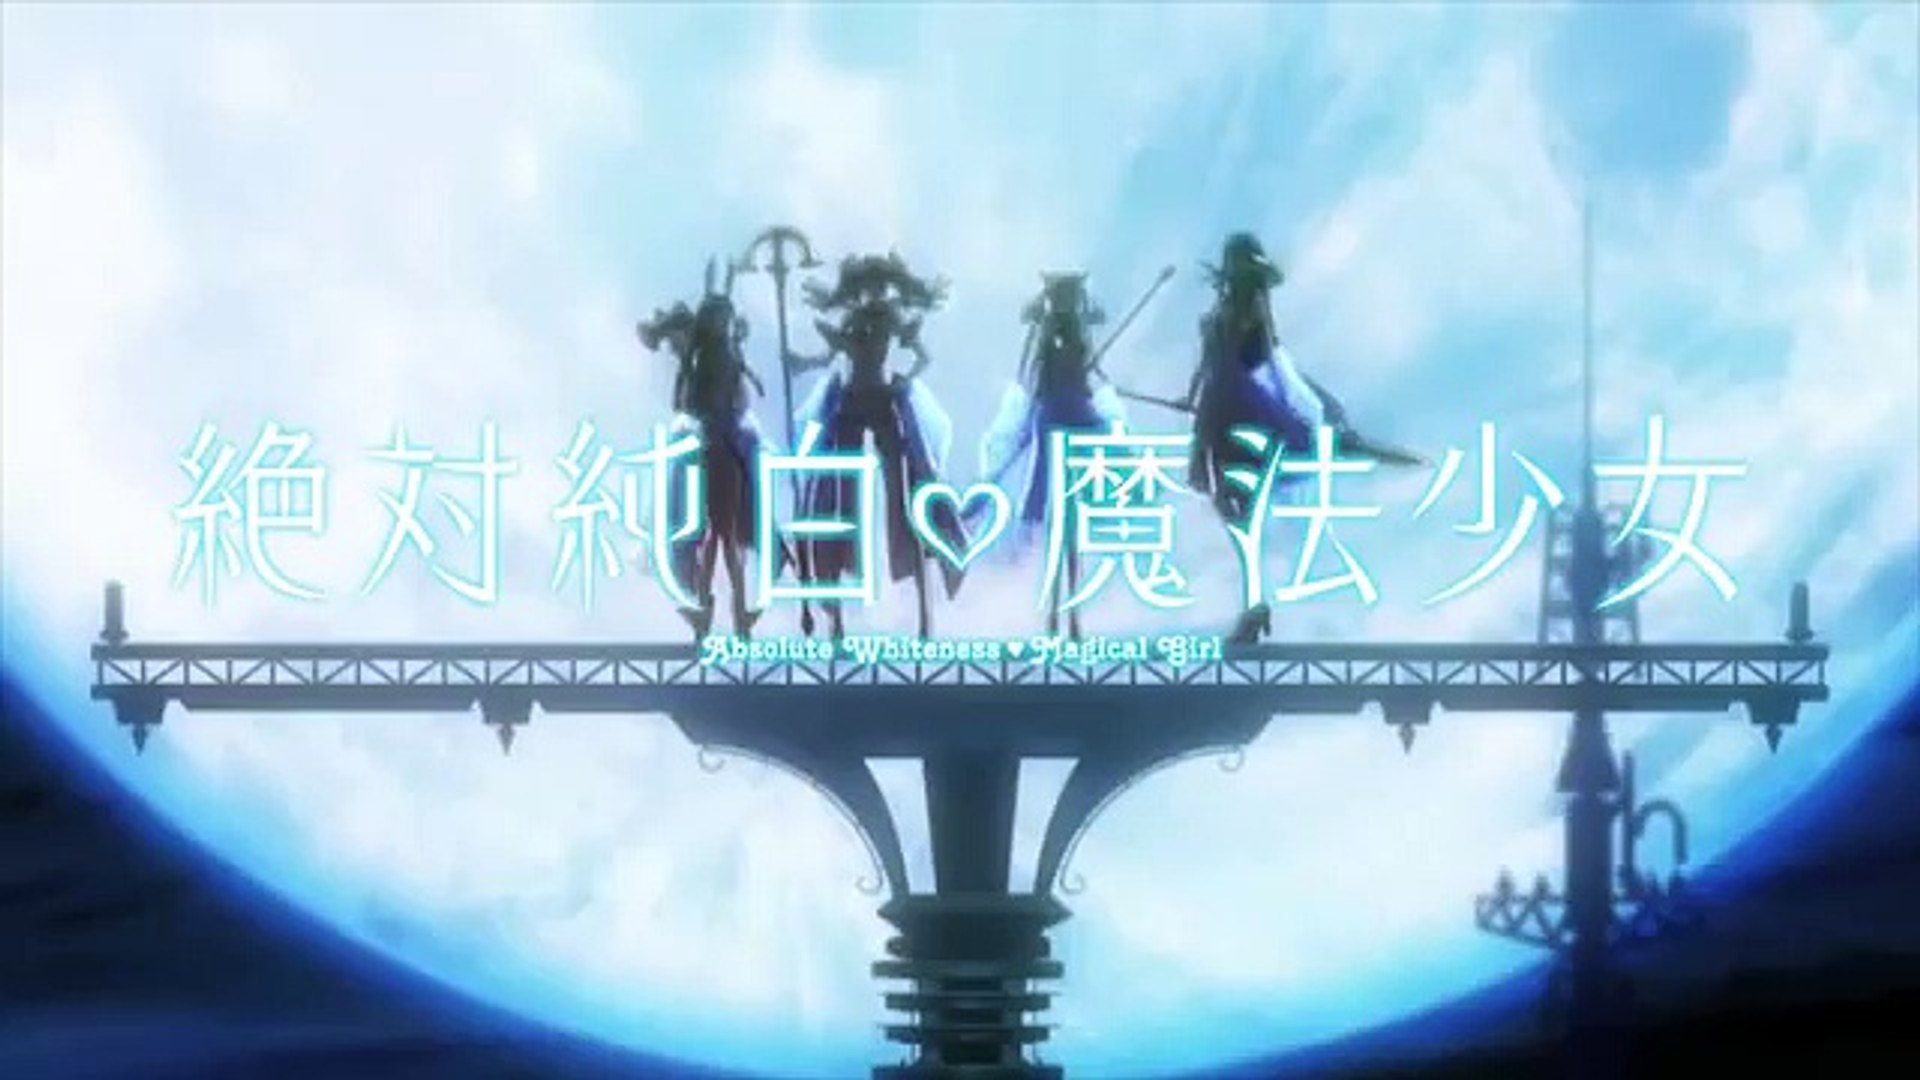 Mahou Shoujo Ikusei Keikaku: revealed new characters and PV! With comments  from the cast! 